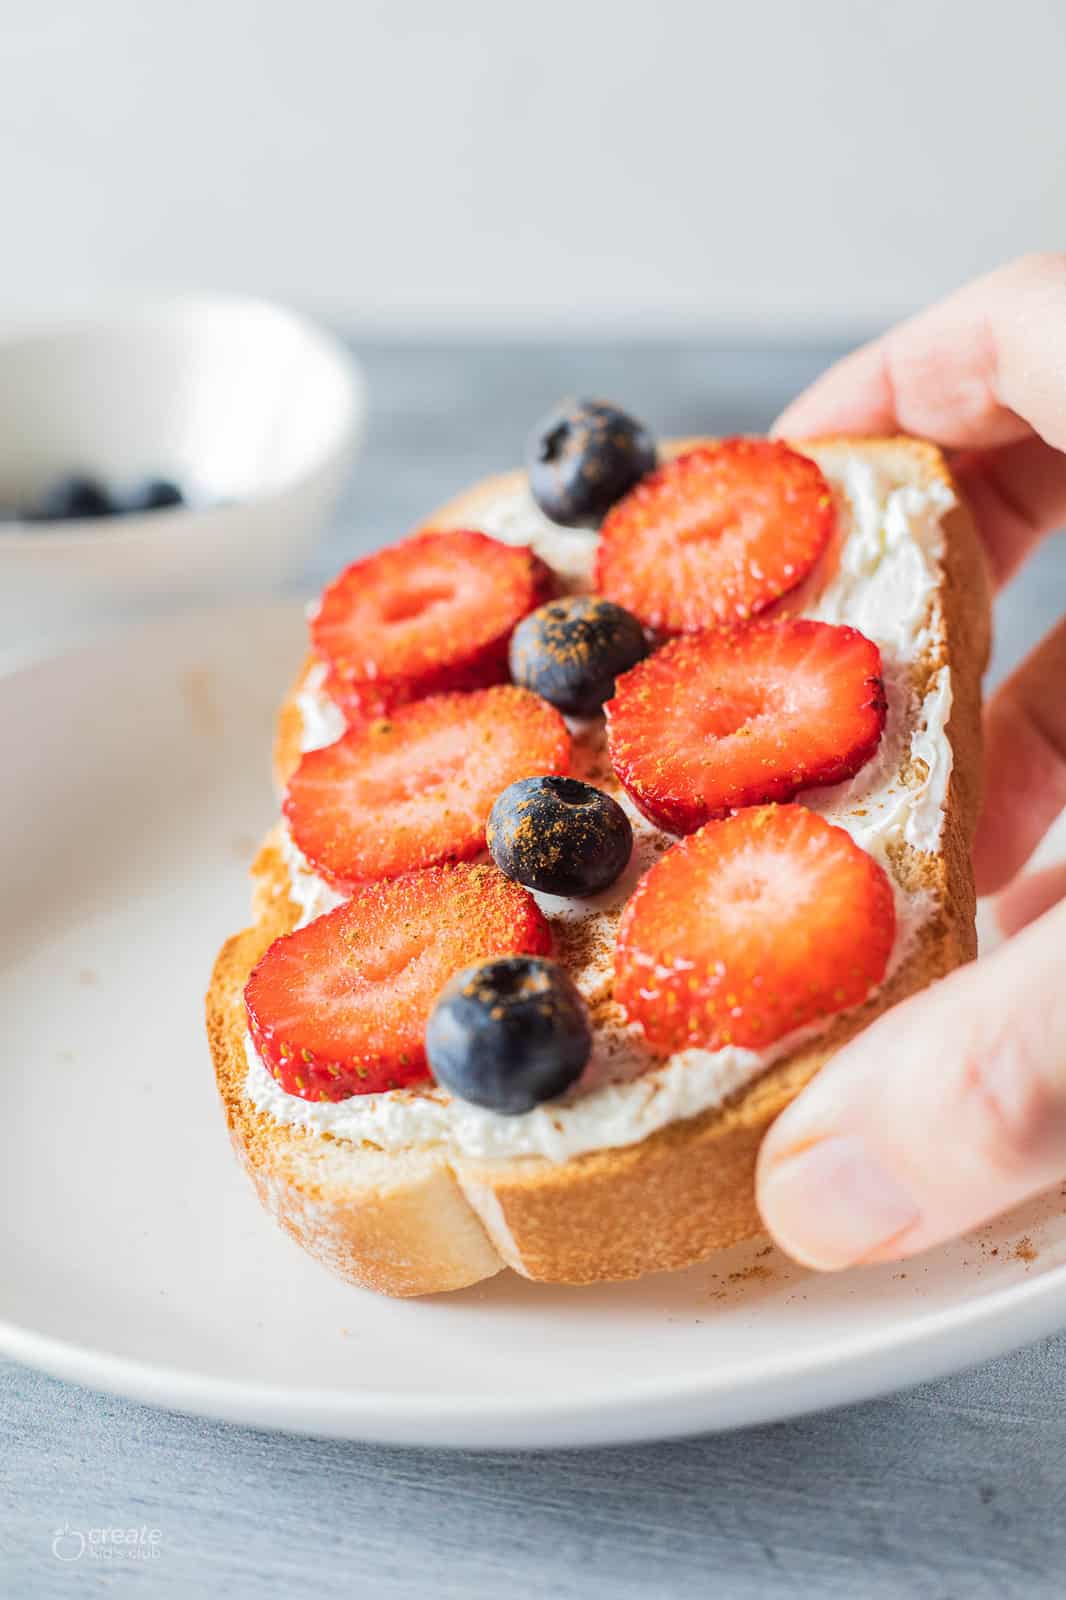 Whipped cream cheese and berries on toast